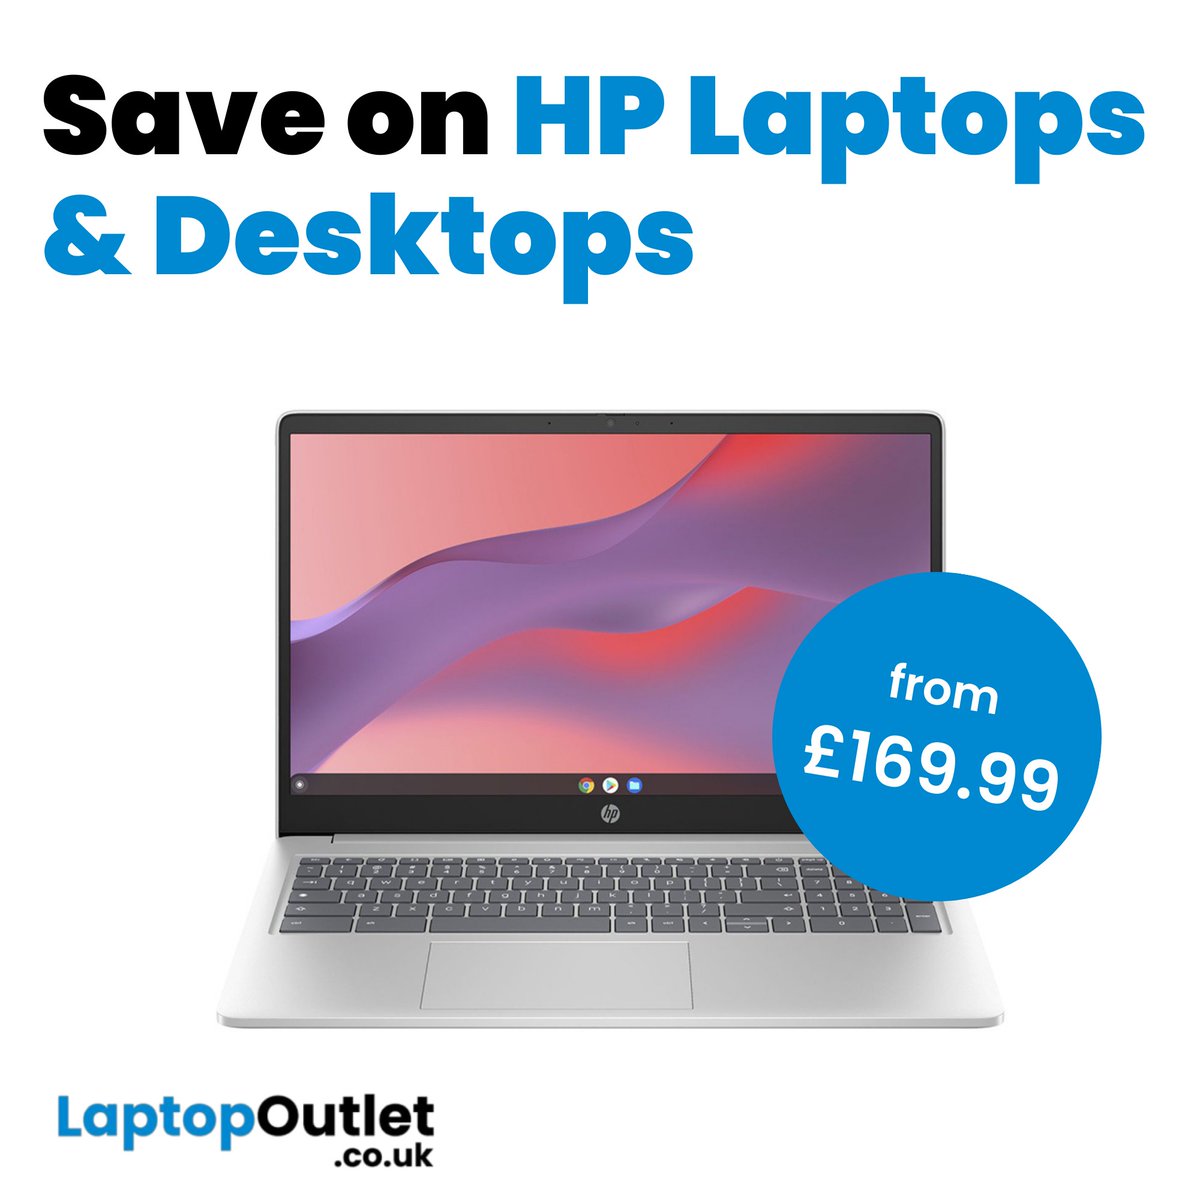 Discover our latest deals on #HP Laptops and Desktops starting from £169.99!

See all the deals here: laptopoutlet.co.uk/brands/dell.ht…

 #HPLaptops #HPDesktops #TechDeals #ComputerDeals #GadgetSale #TechOffers #LaptopSale #DesktopSale #ElectronicsDeals #OnlineShopping